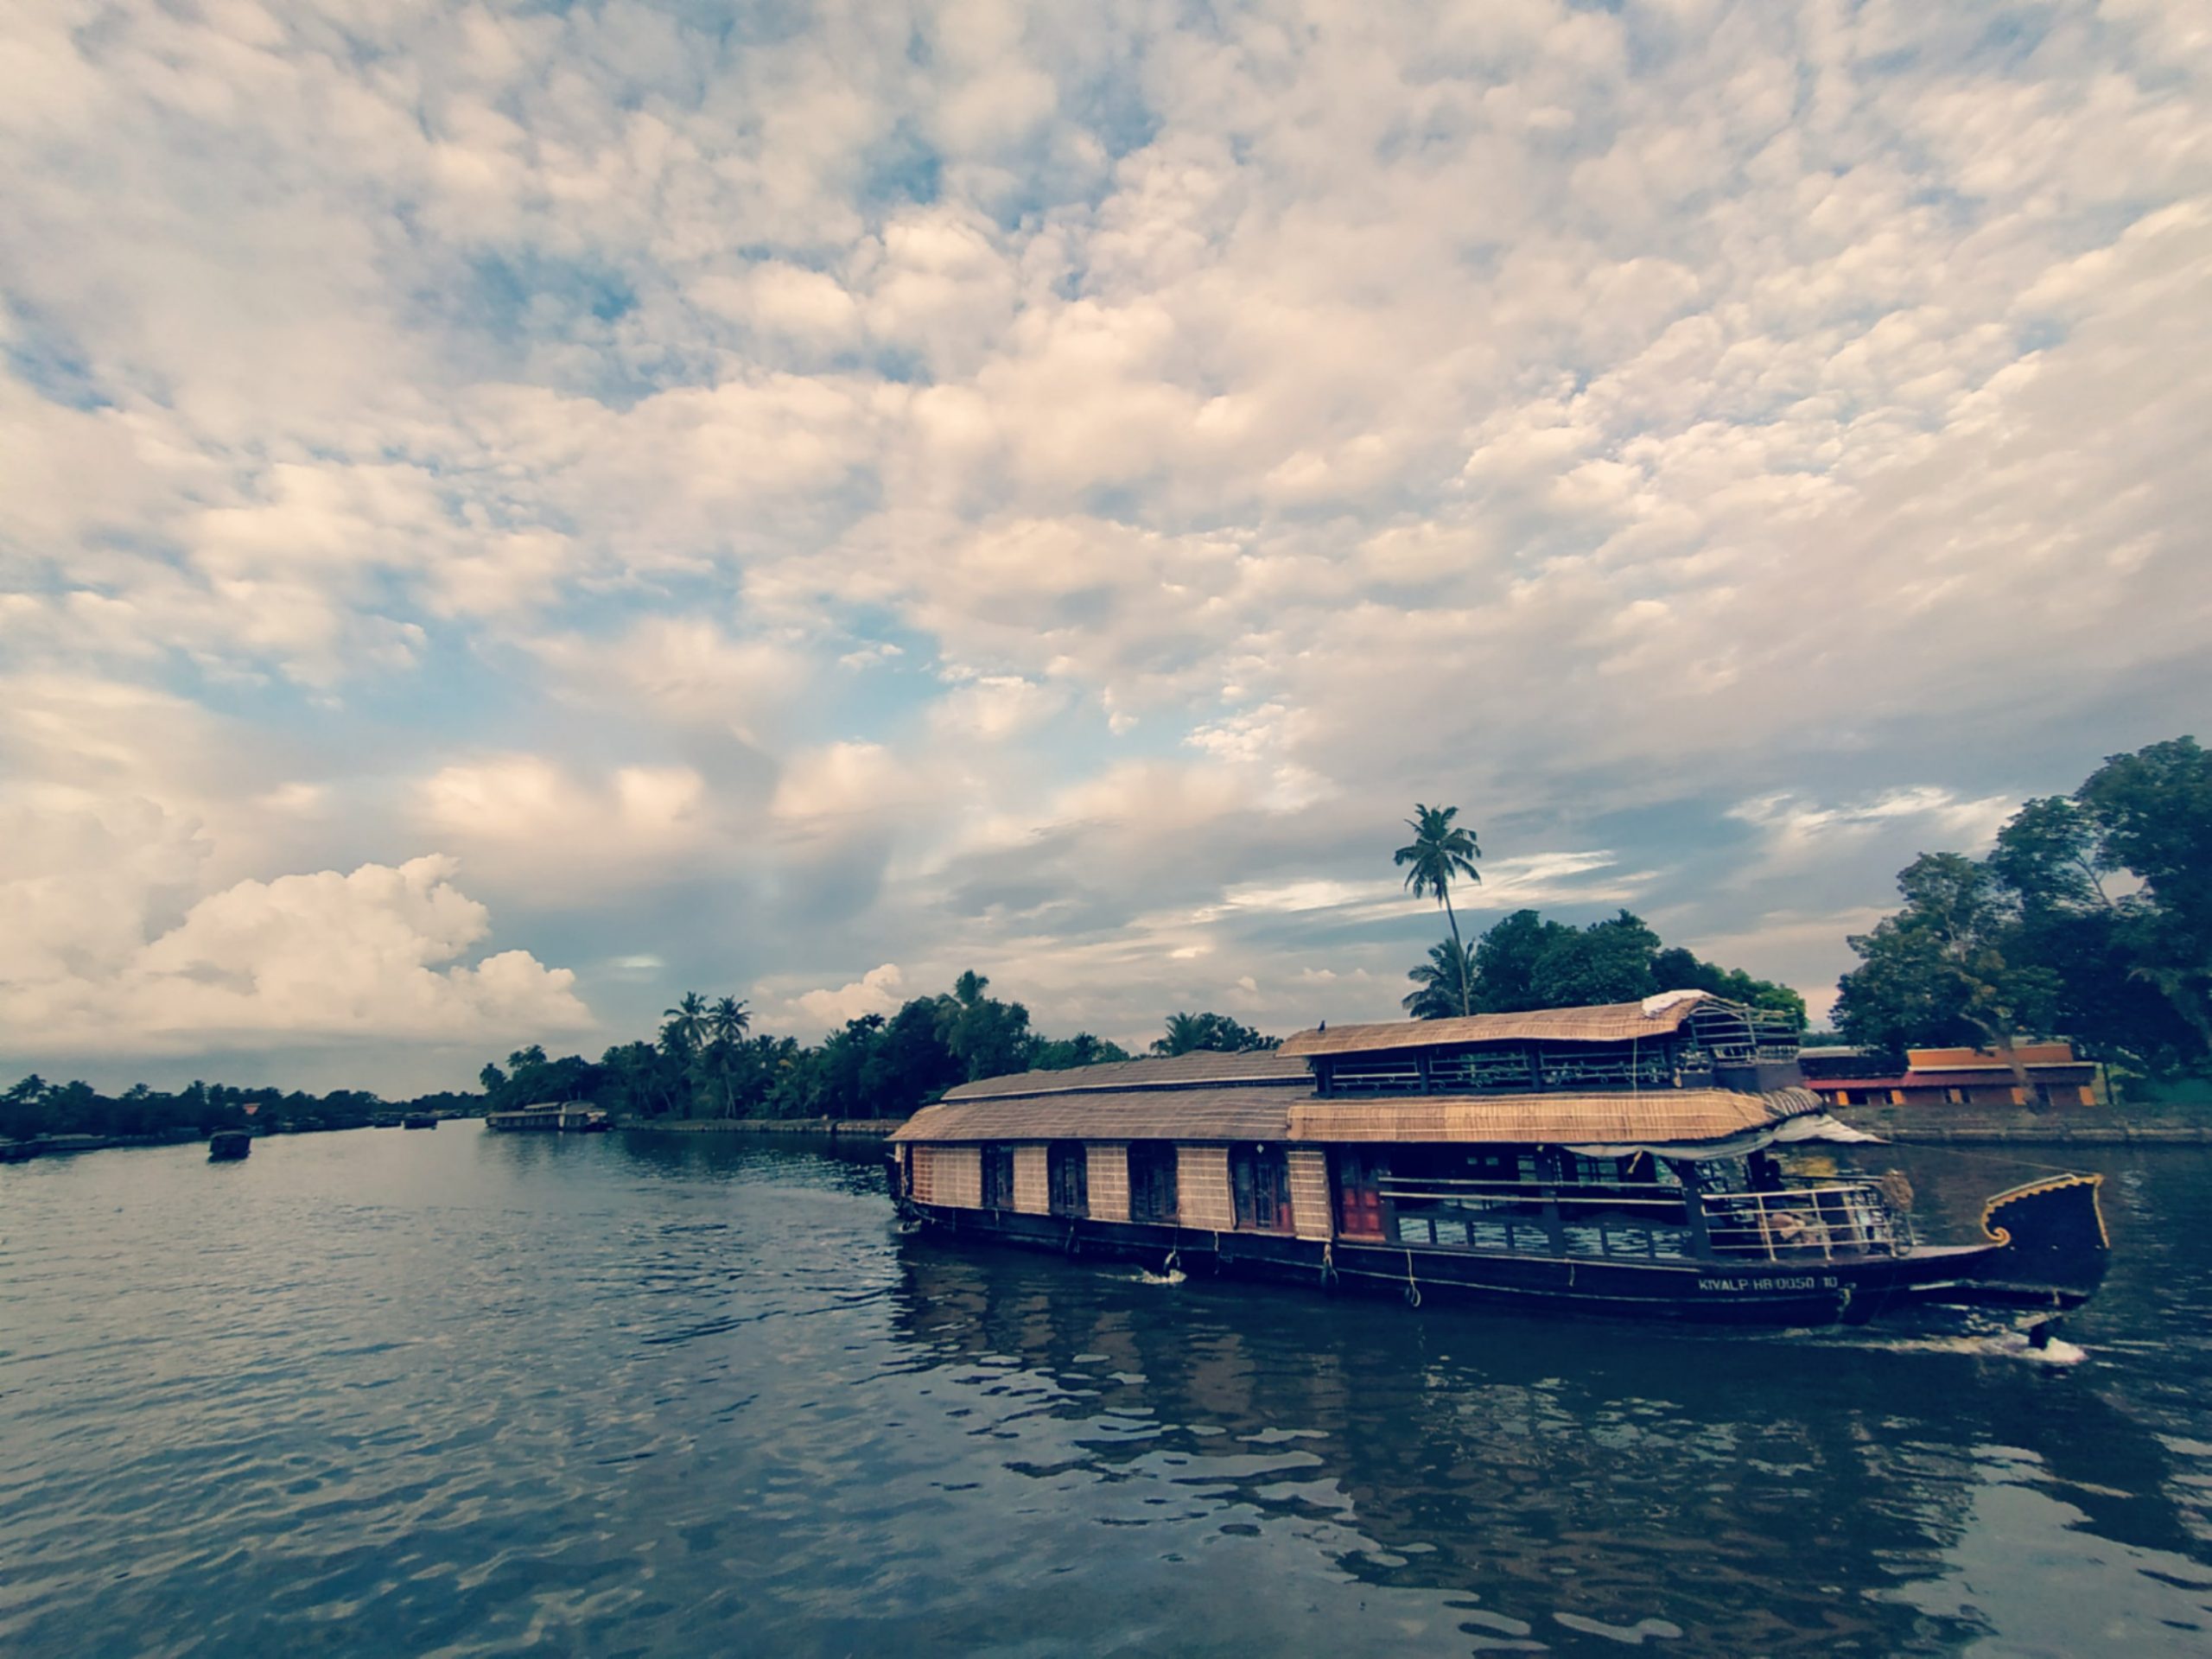 Boathouse - Alleppey